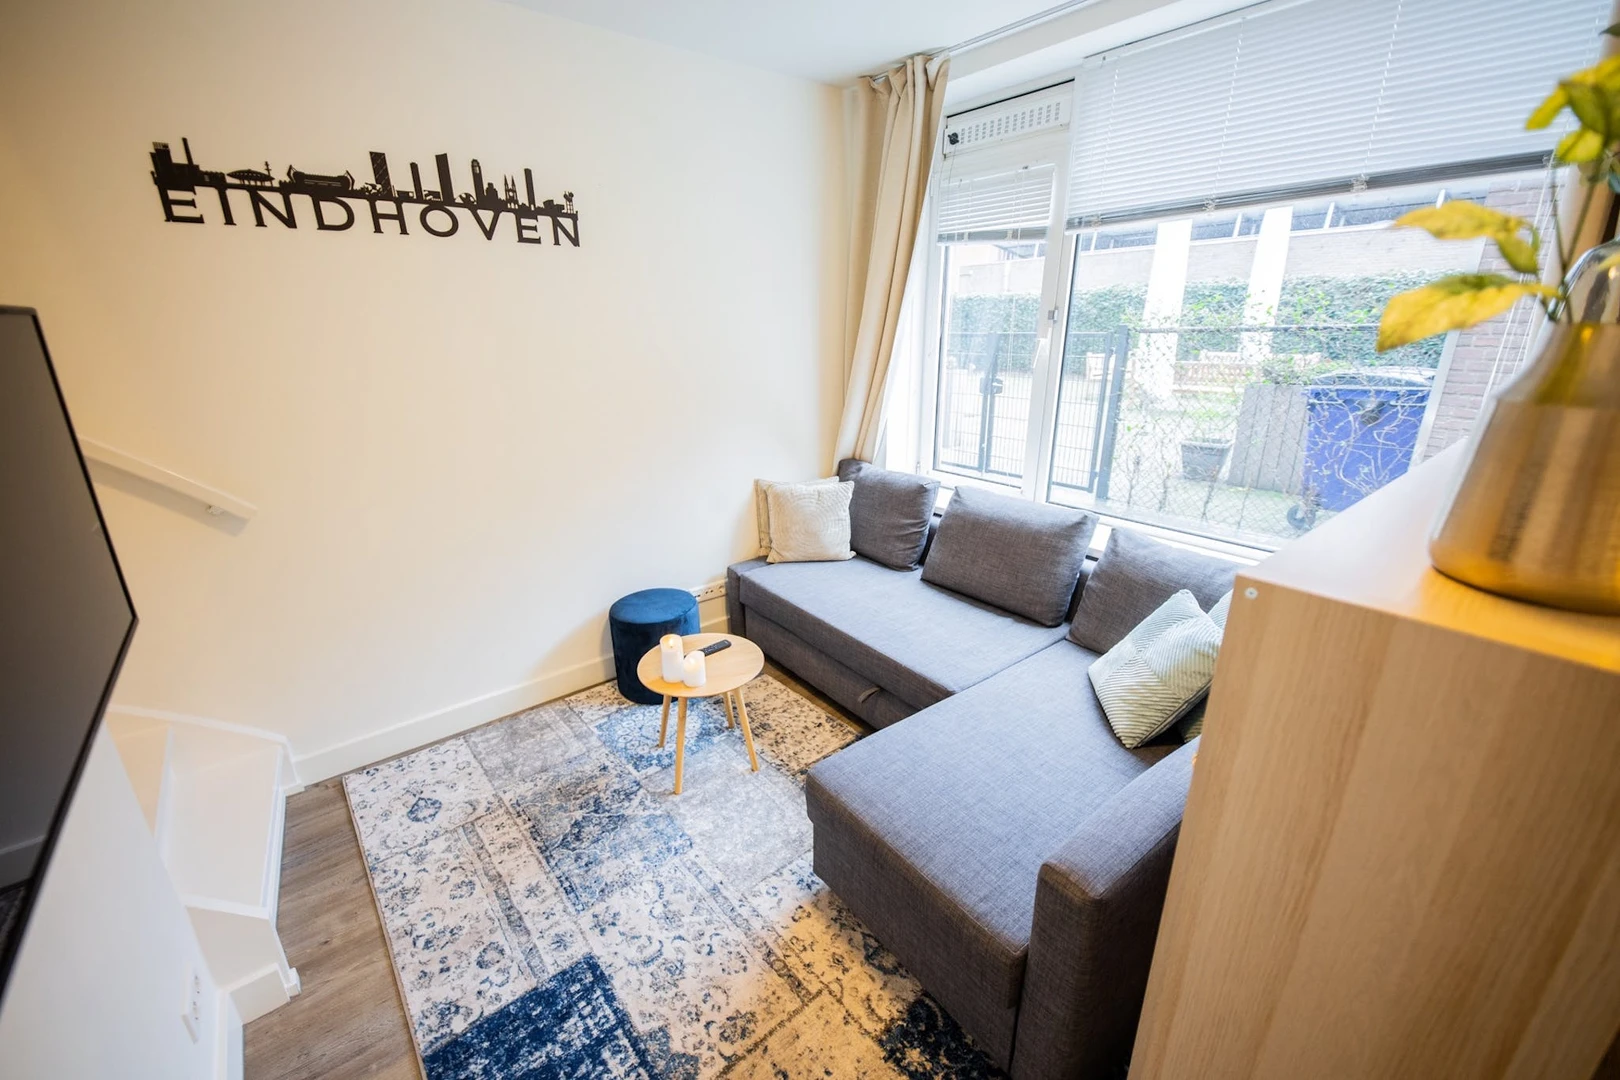 Accommodation in the centre of Eindhoven